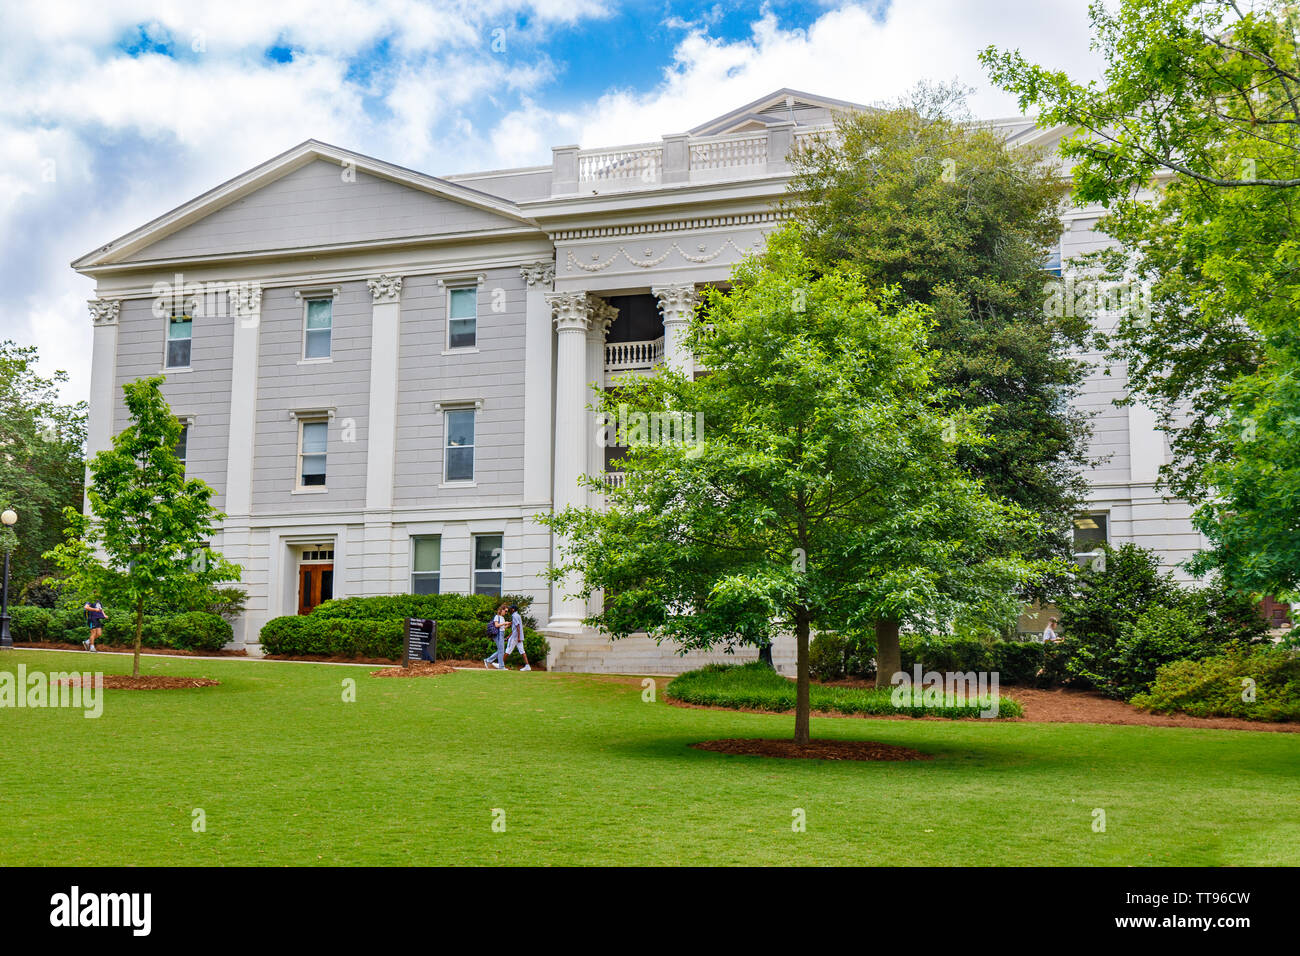 ATHENS, GA, USA - May 3: Holmes-Hunter Academic Building on May 3, 2019 at the University of Georgia, North Campus in Athens, Georgia. Stock Photo